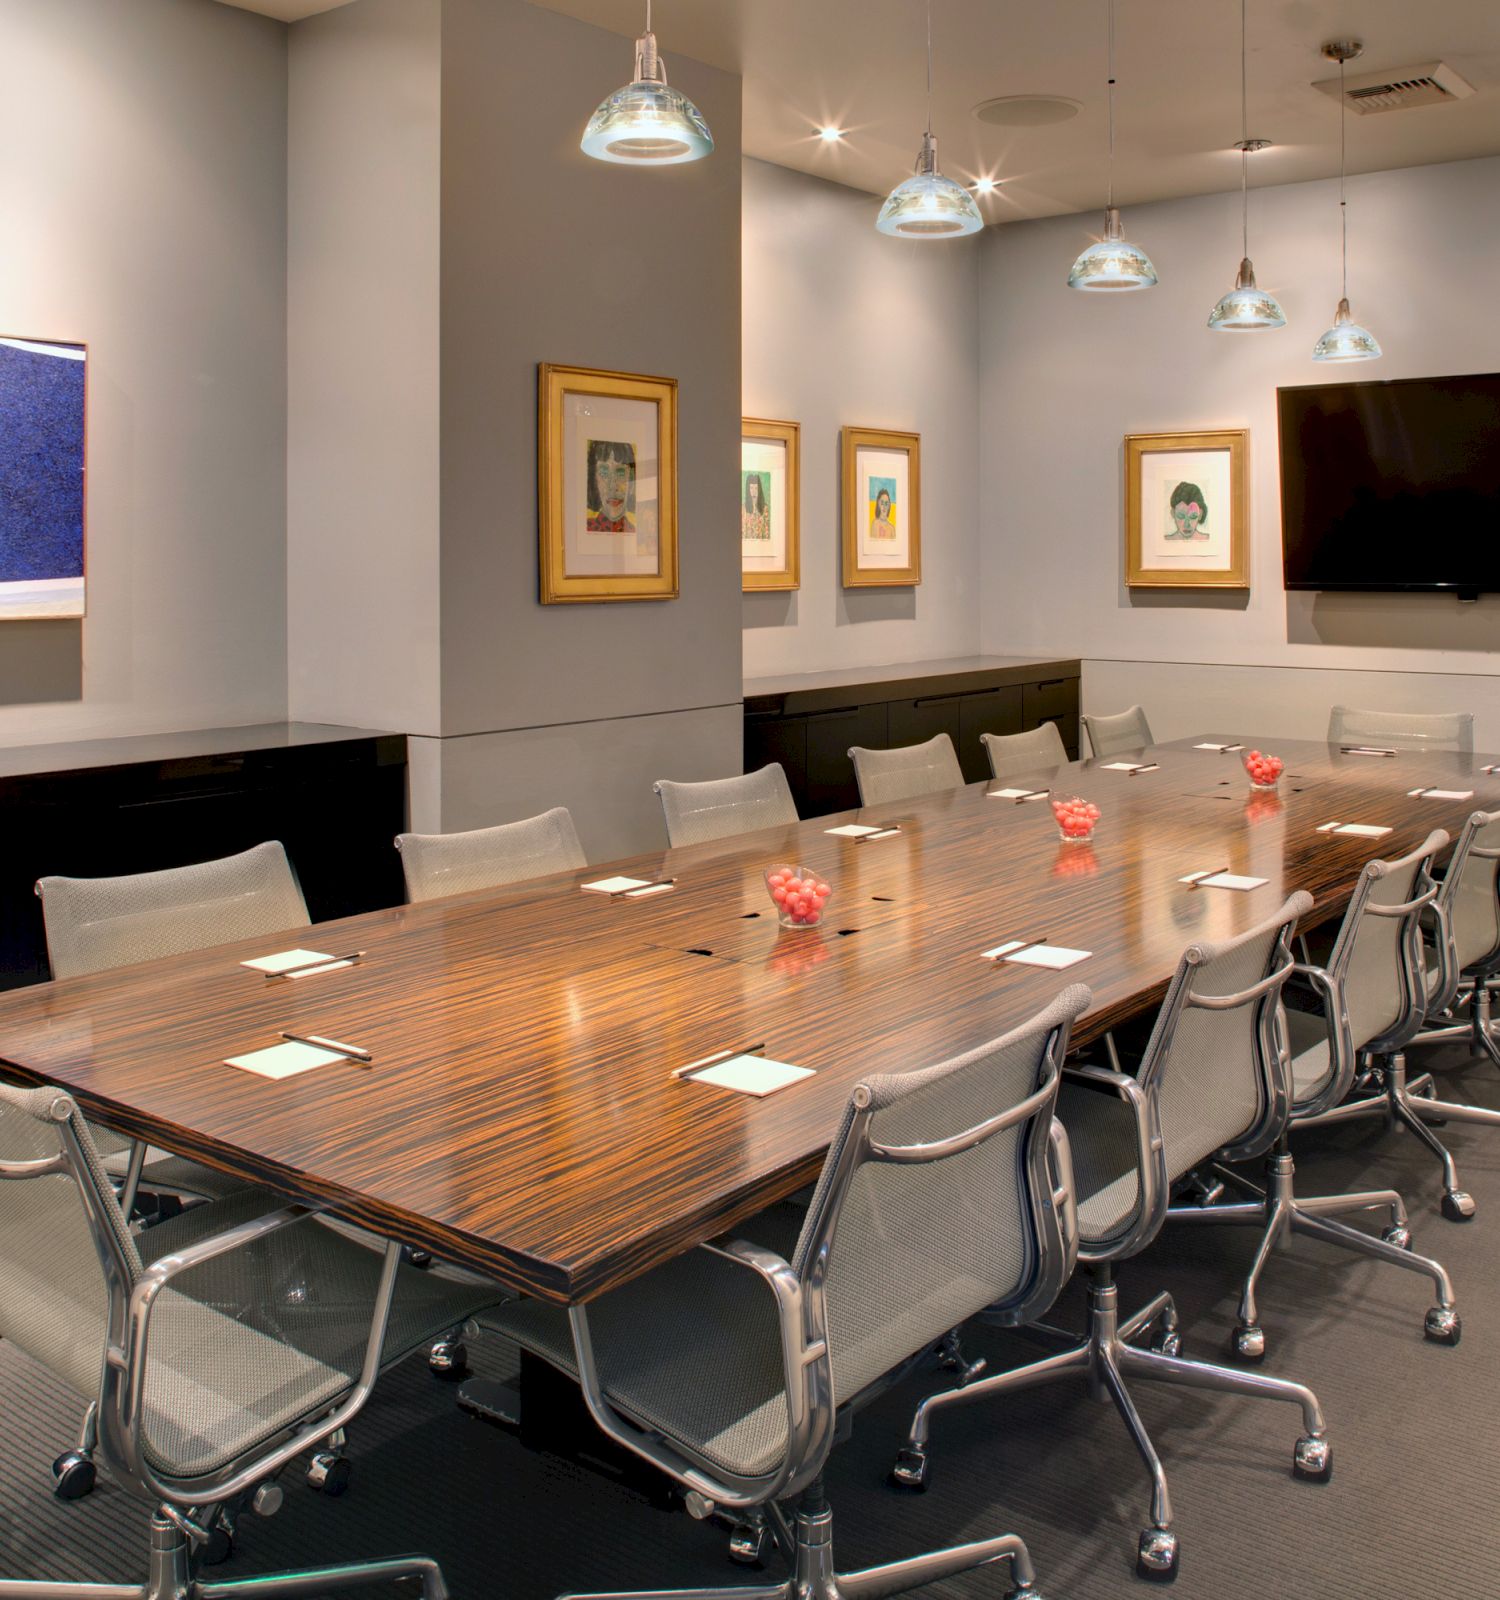 A modern conference room with a long wooden table, surrounding chairs, a wall-mounted TV, framed artworks, and pendant lights.